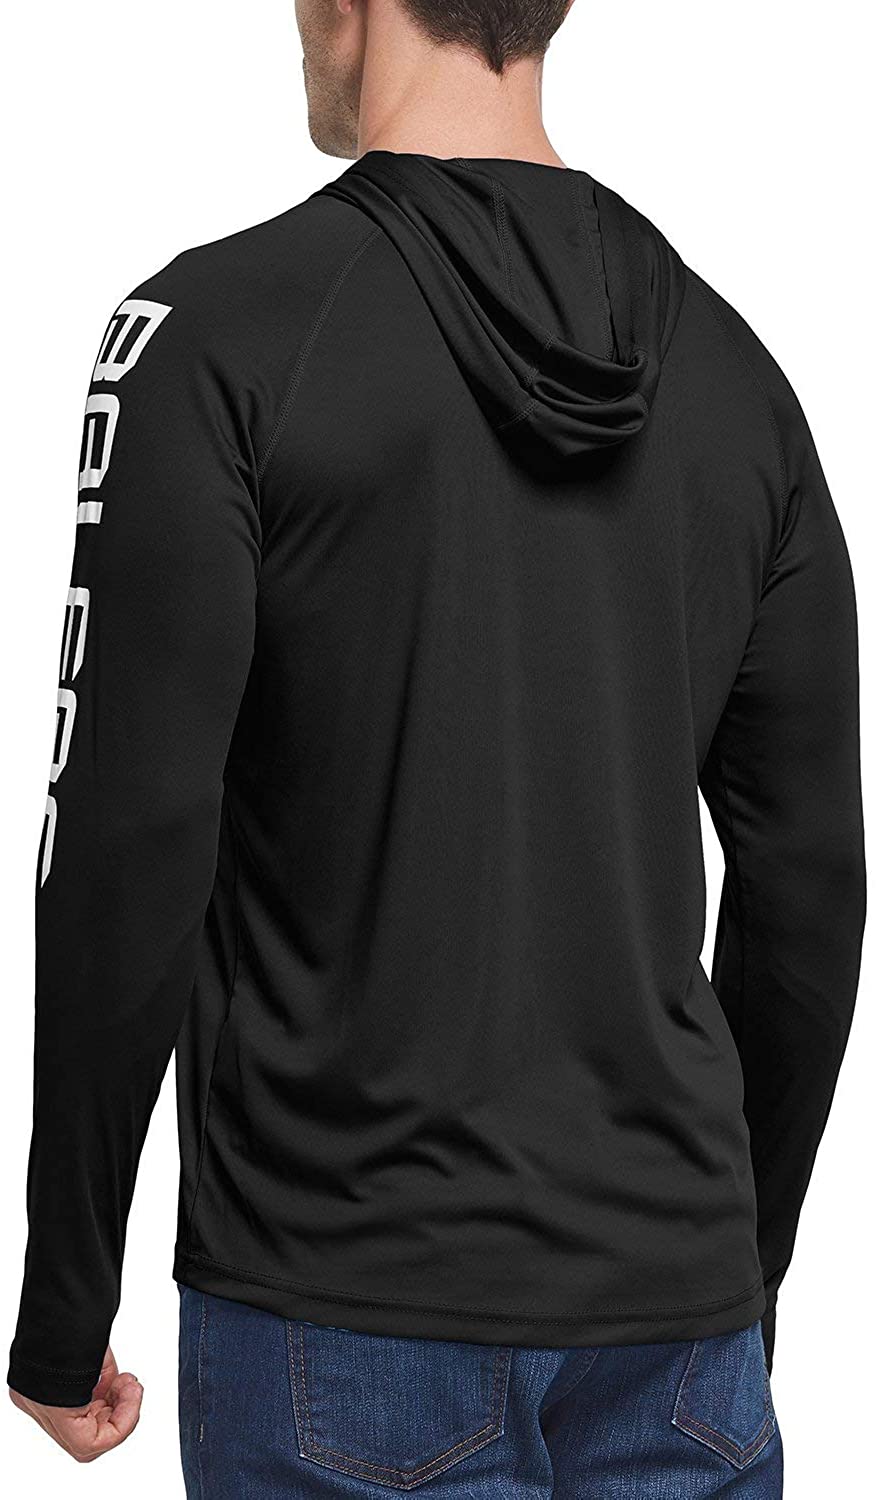 BALEAF Men's UPF 50+ Sun Protection Athletic Hoodie Long Sleeve Workout ...